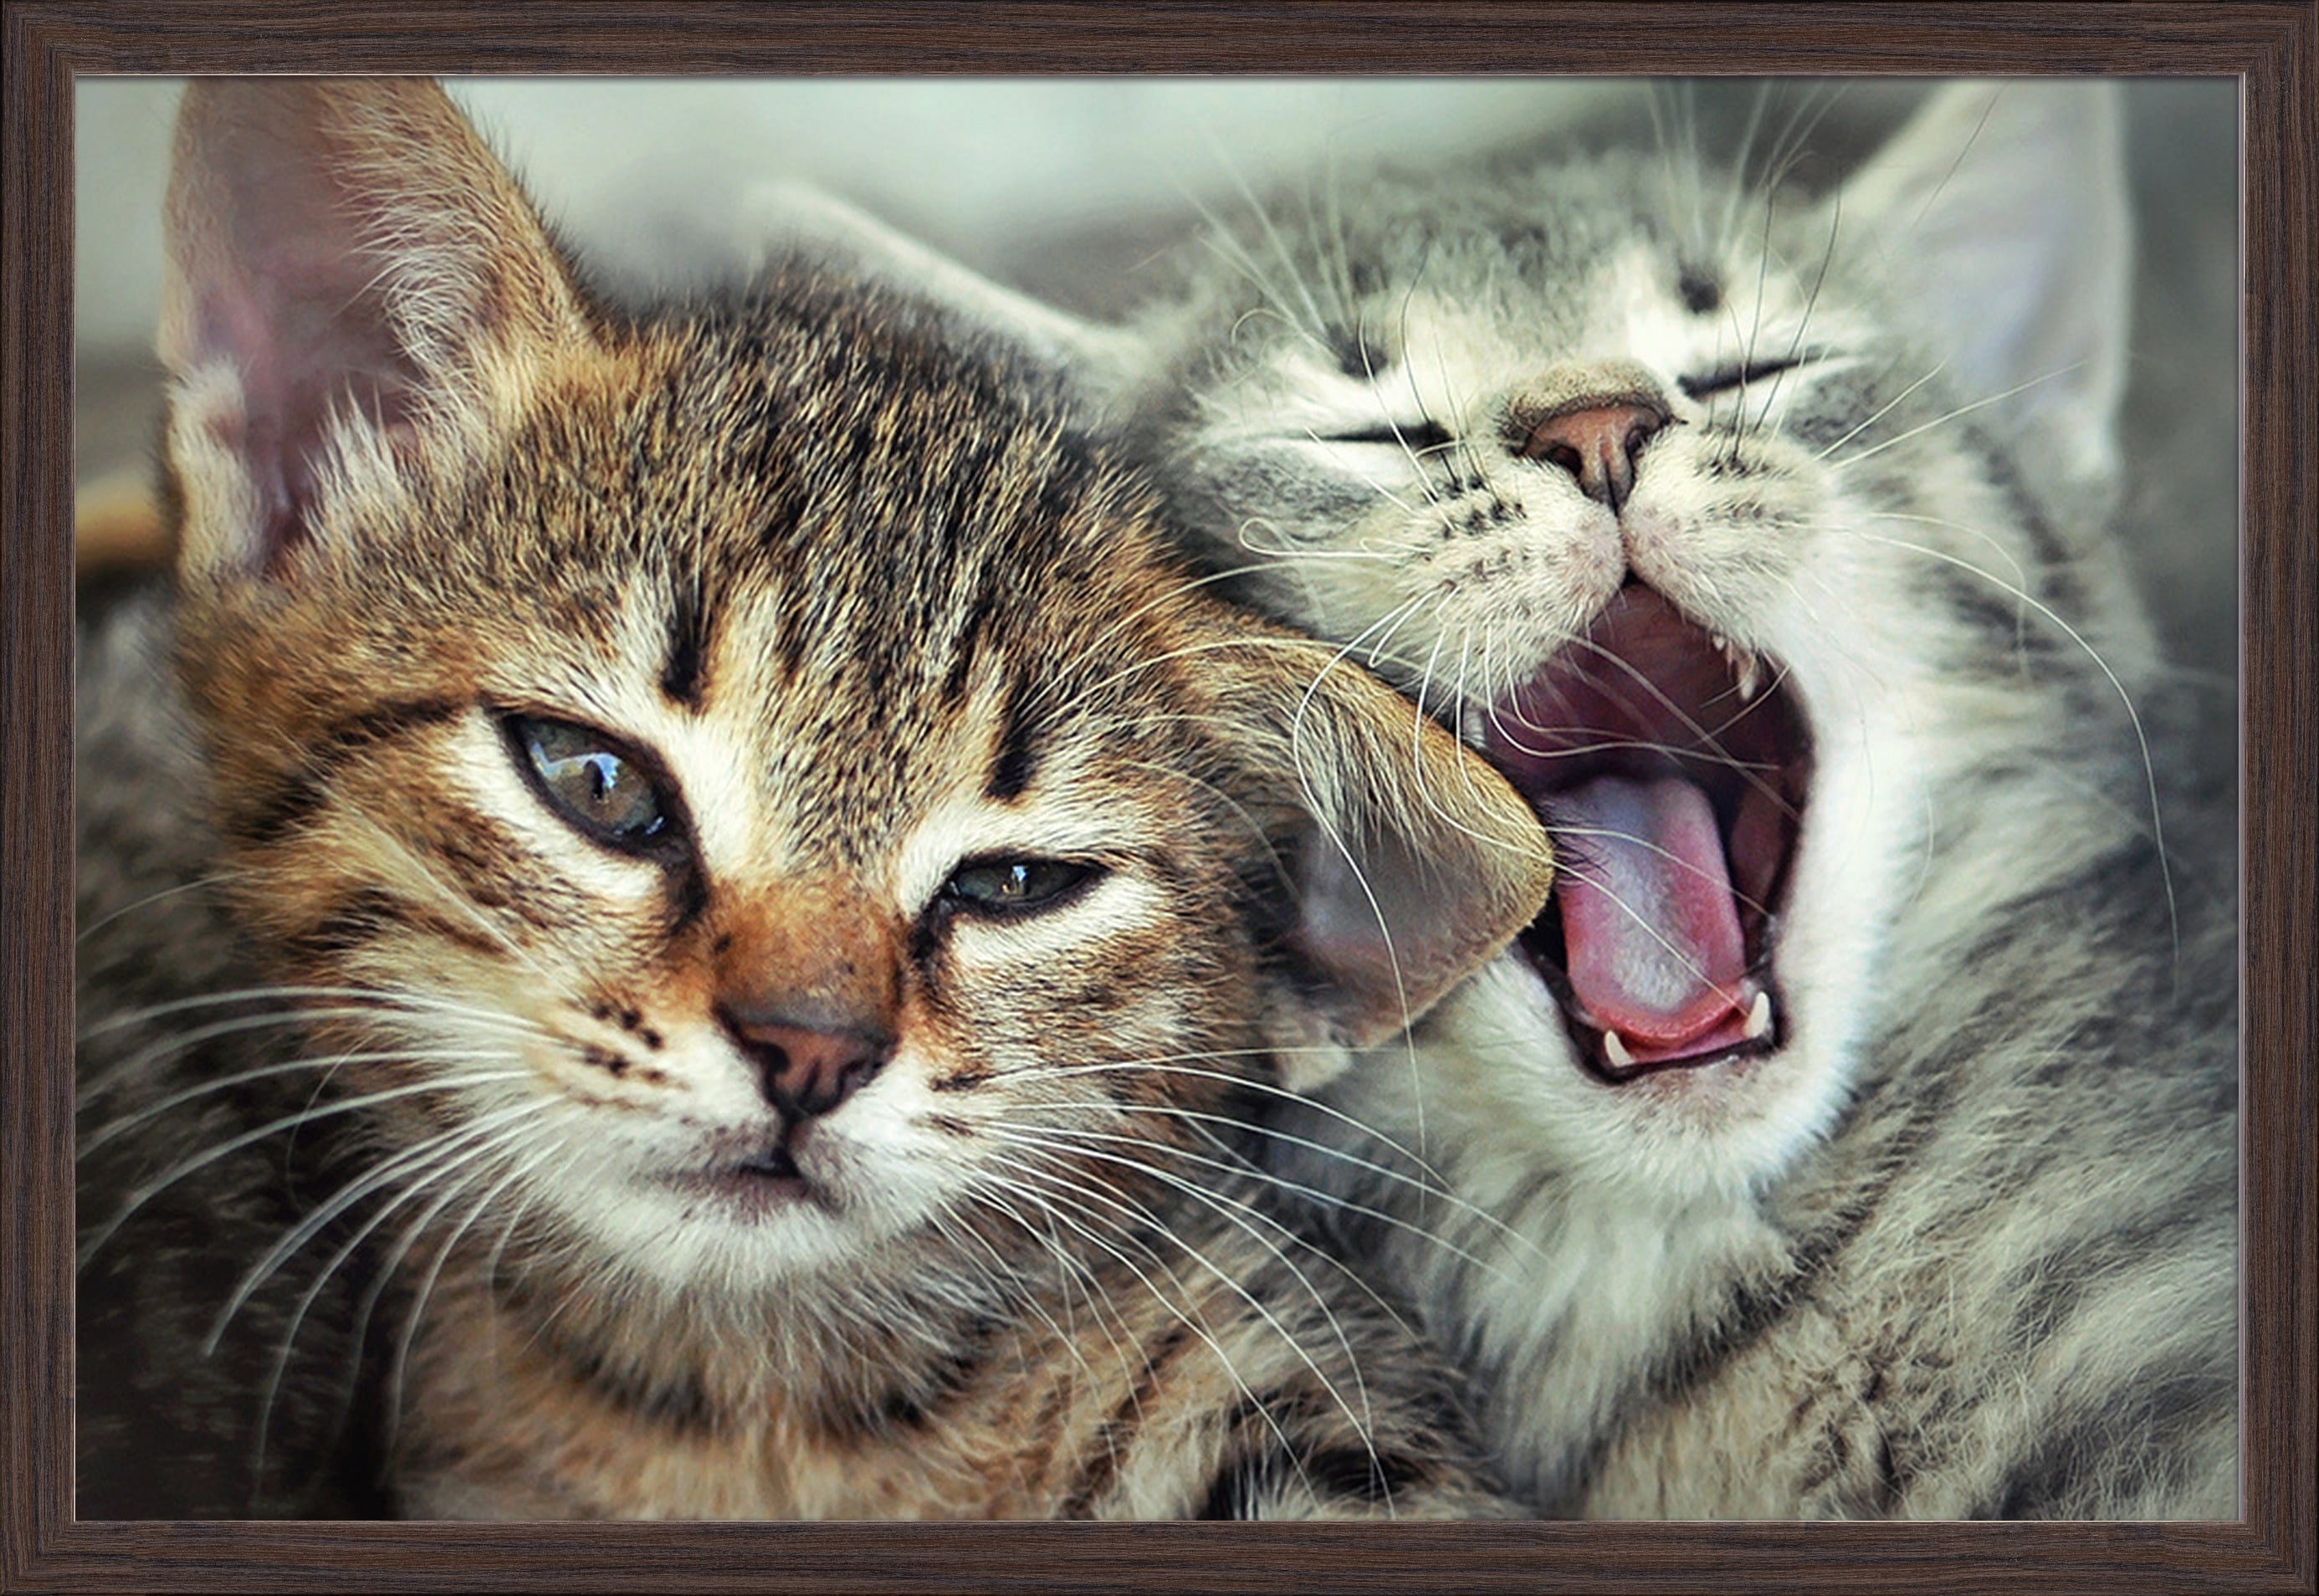 Kittens Lounging 18x12 Gallery Wrapped Stretched Canvas